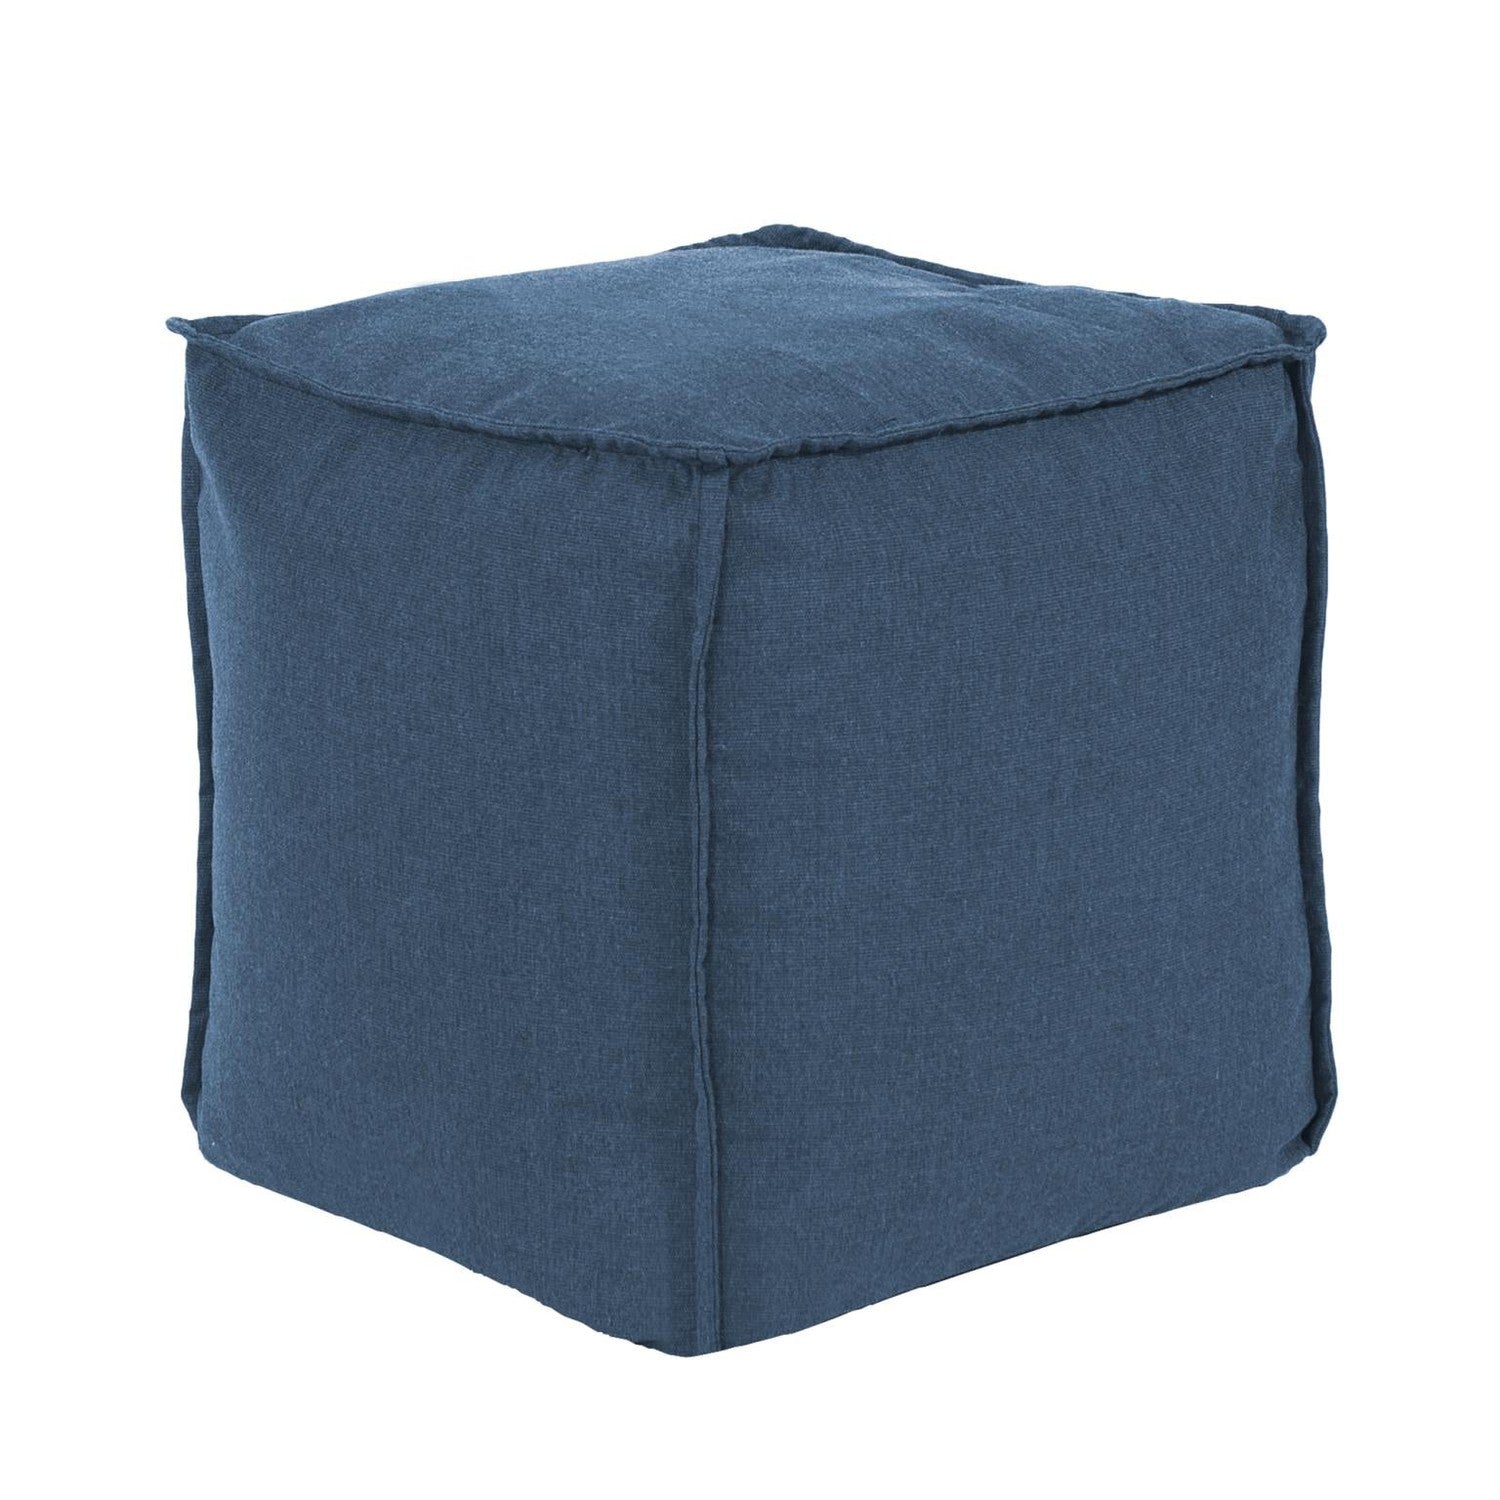 Outdoor Square Pouf-The Howard Elliott Collection-HOWARD-Q873-298-Stools & OttomansTurquoise-Cube Pouf-18-France and Son